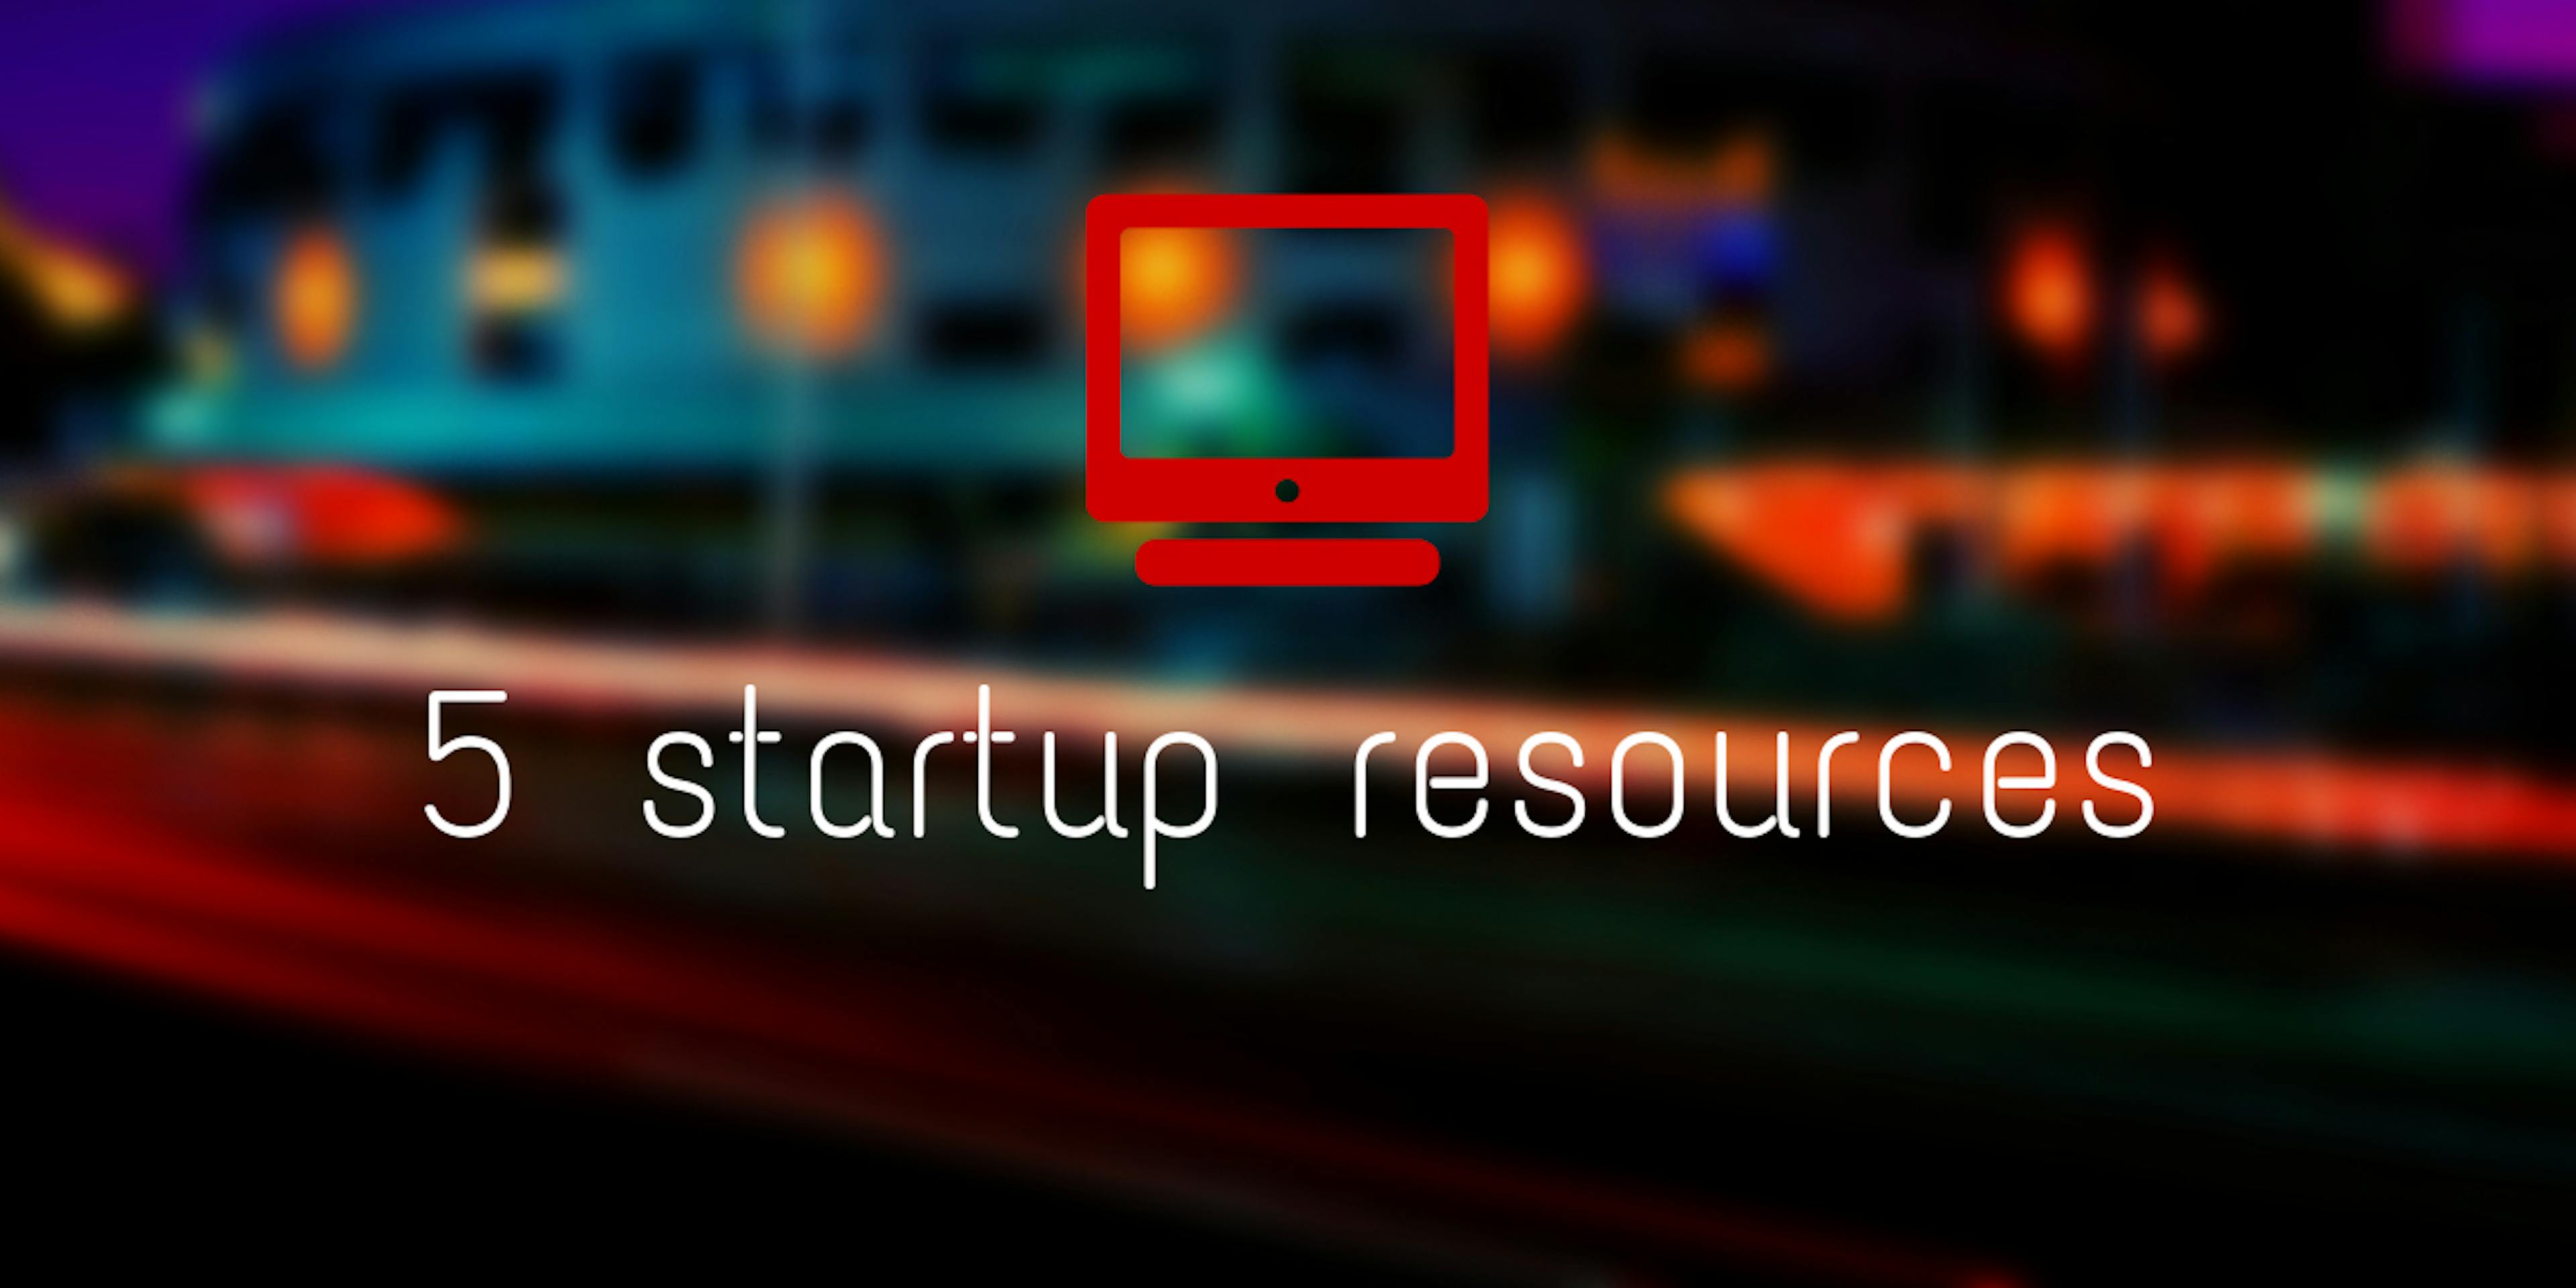 /5-resources-to-help-kickstart-your-location-technology-startup-2gpu48ws feature image